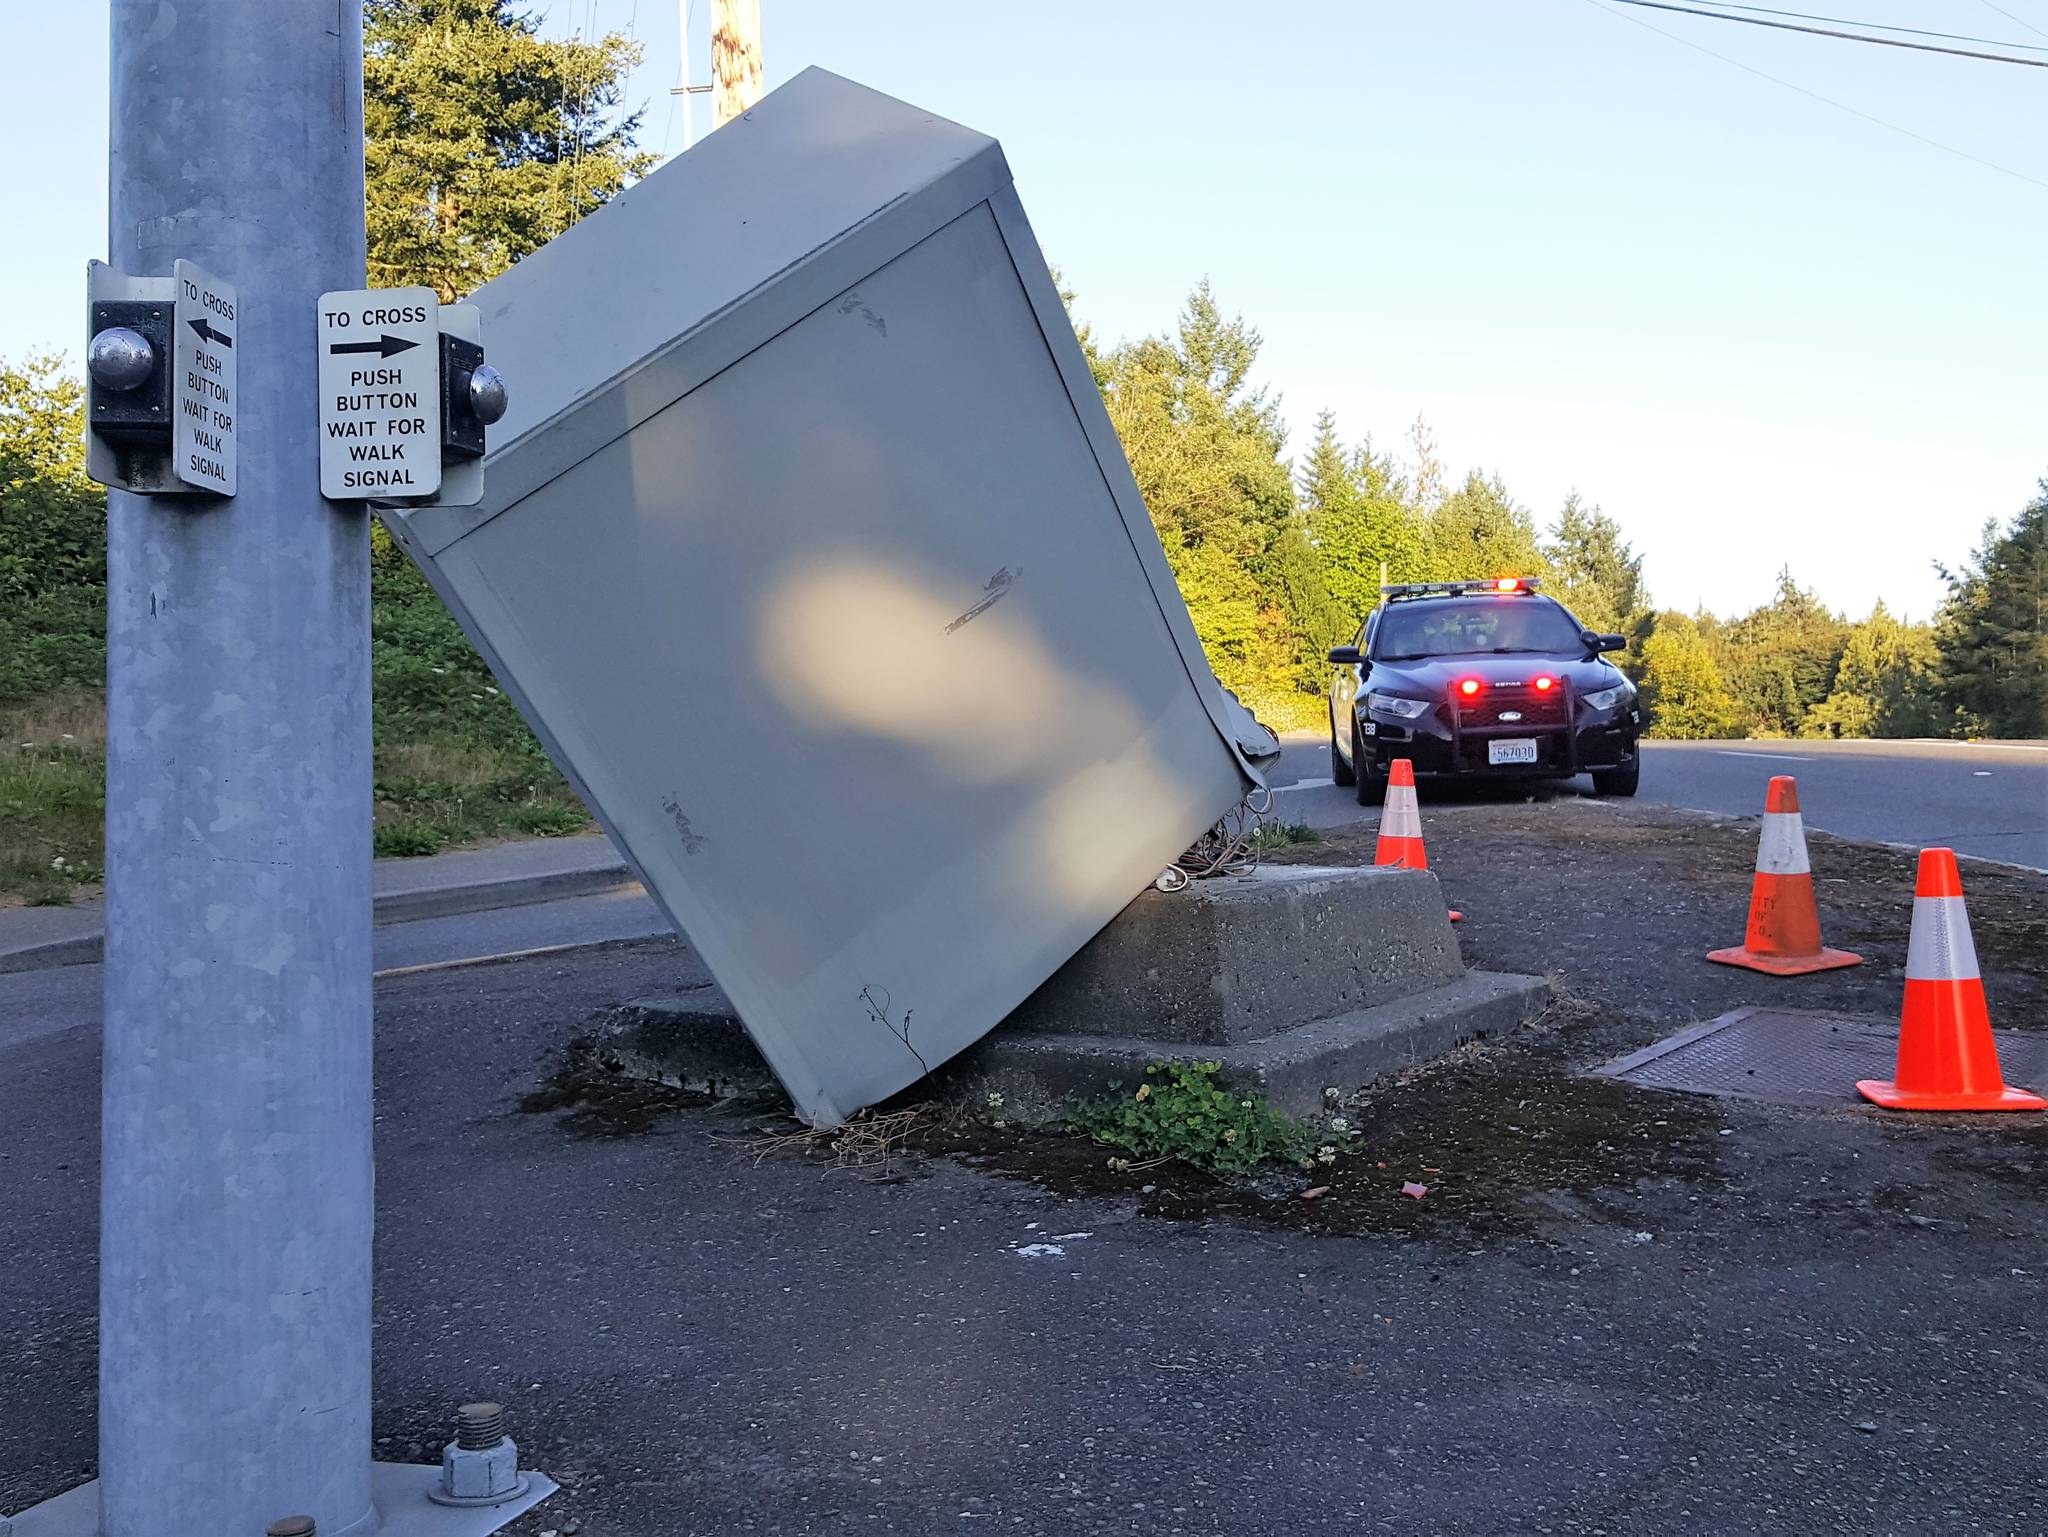 A traffic control box at the intersection of Sidney and Tremont streets in Port Orchard was collateral damage from a vehicle collision that plowed into the signal stanchion Saturday evening, Aug. 4. The pole wasn’t damaged but the light signal box was knocked off its base. (Robert Zollna | Kitsap Daily News)